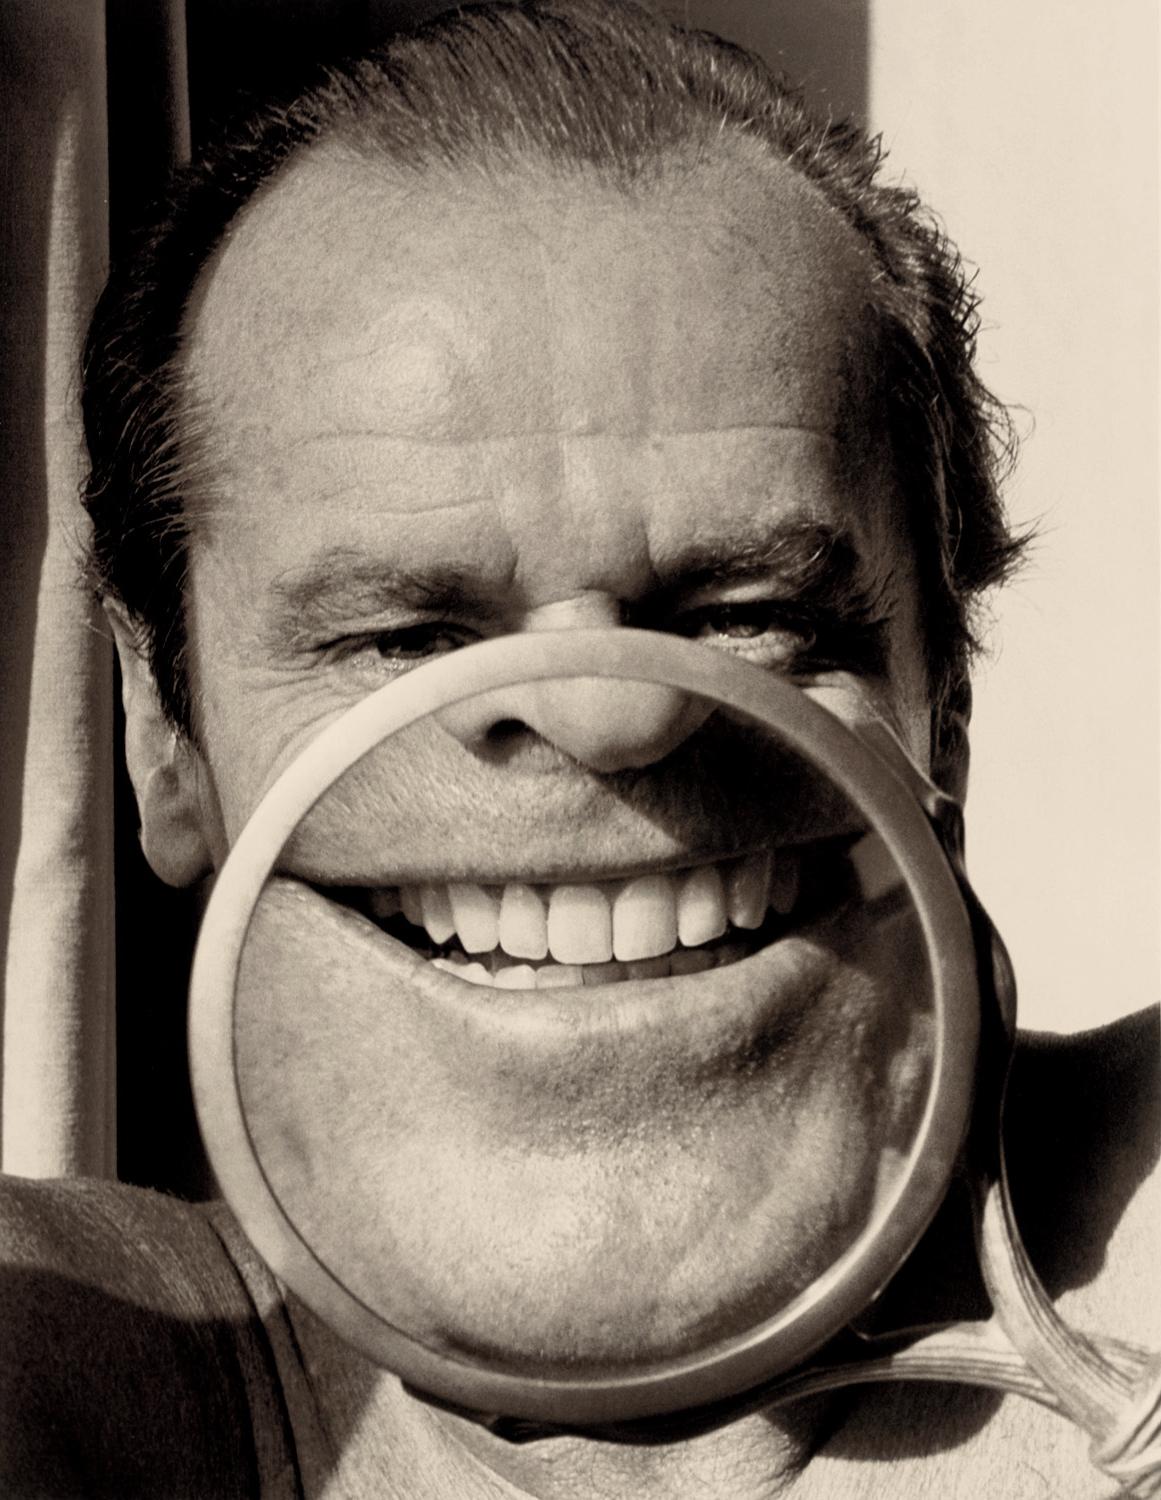 Jack Nicholson, Los Angeles - Photograph by Herb Ritts